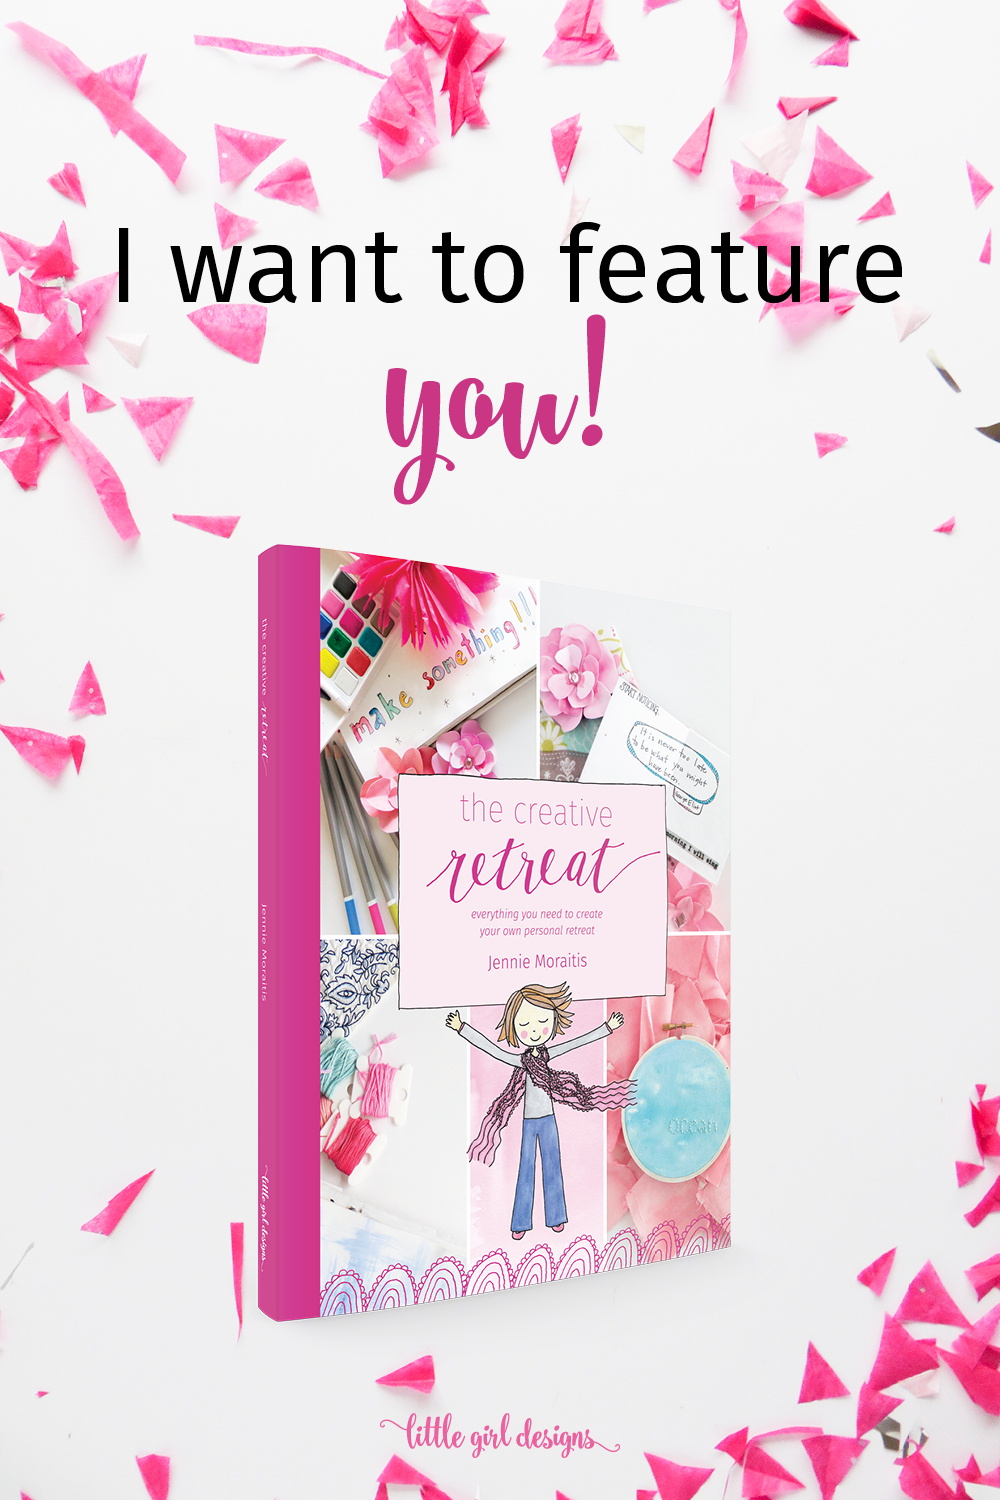 I want to feature you! Do you have a Creative Retreat book? Send me a picture of your book and I'll share it on my Instagram. It's so fun to see these books being used all over the world! You'll get to inspire so many women. :)